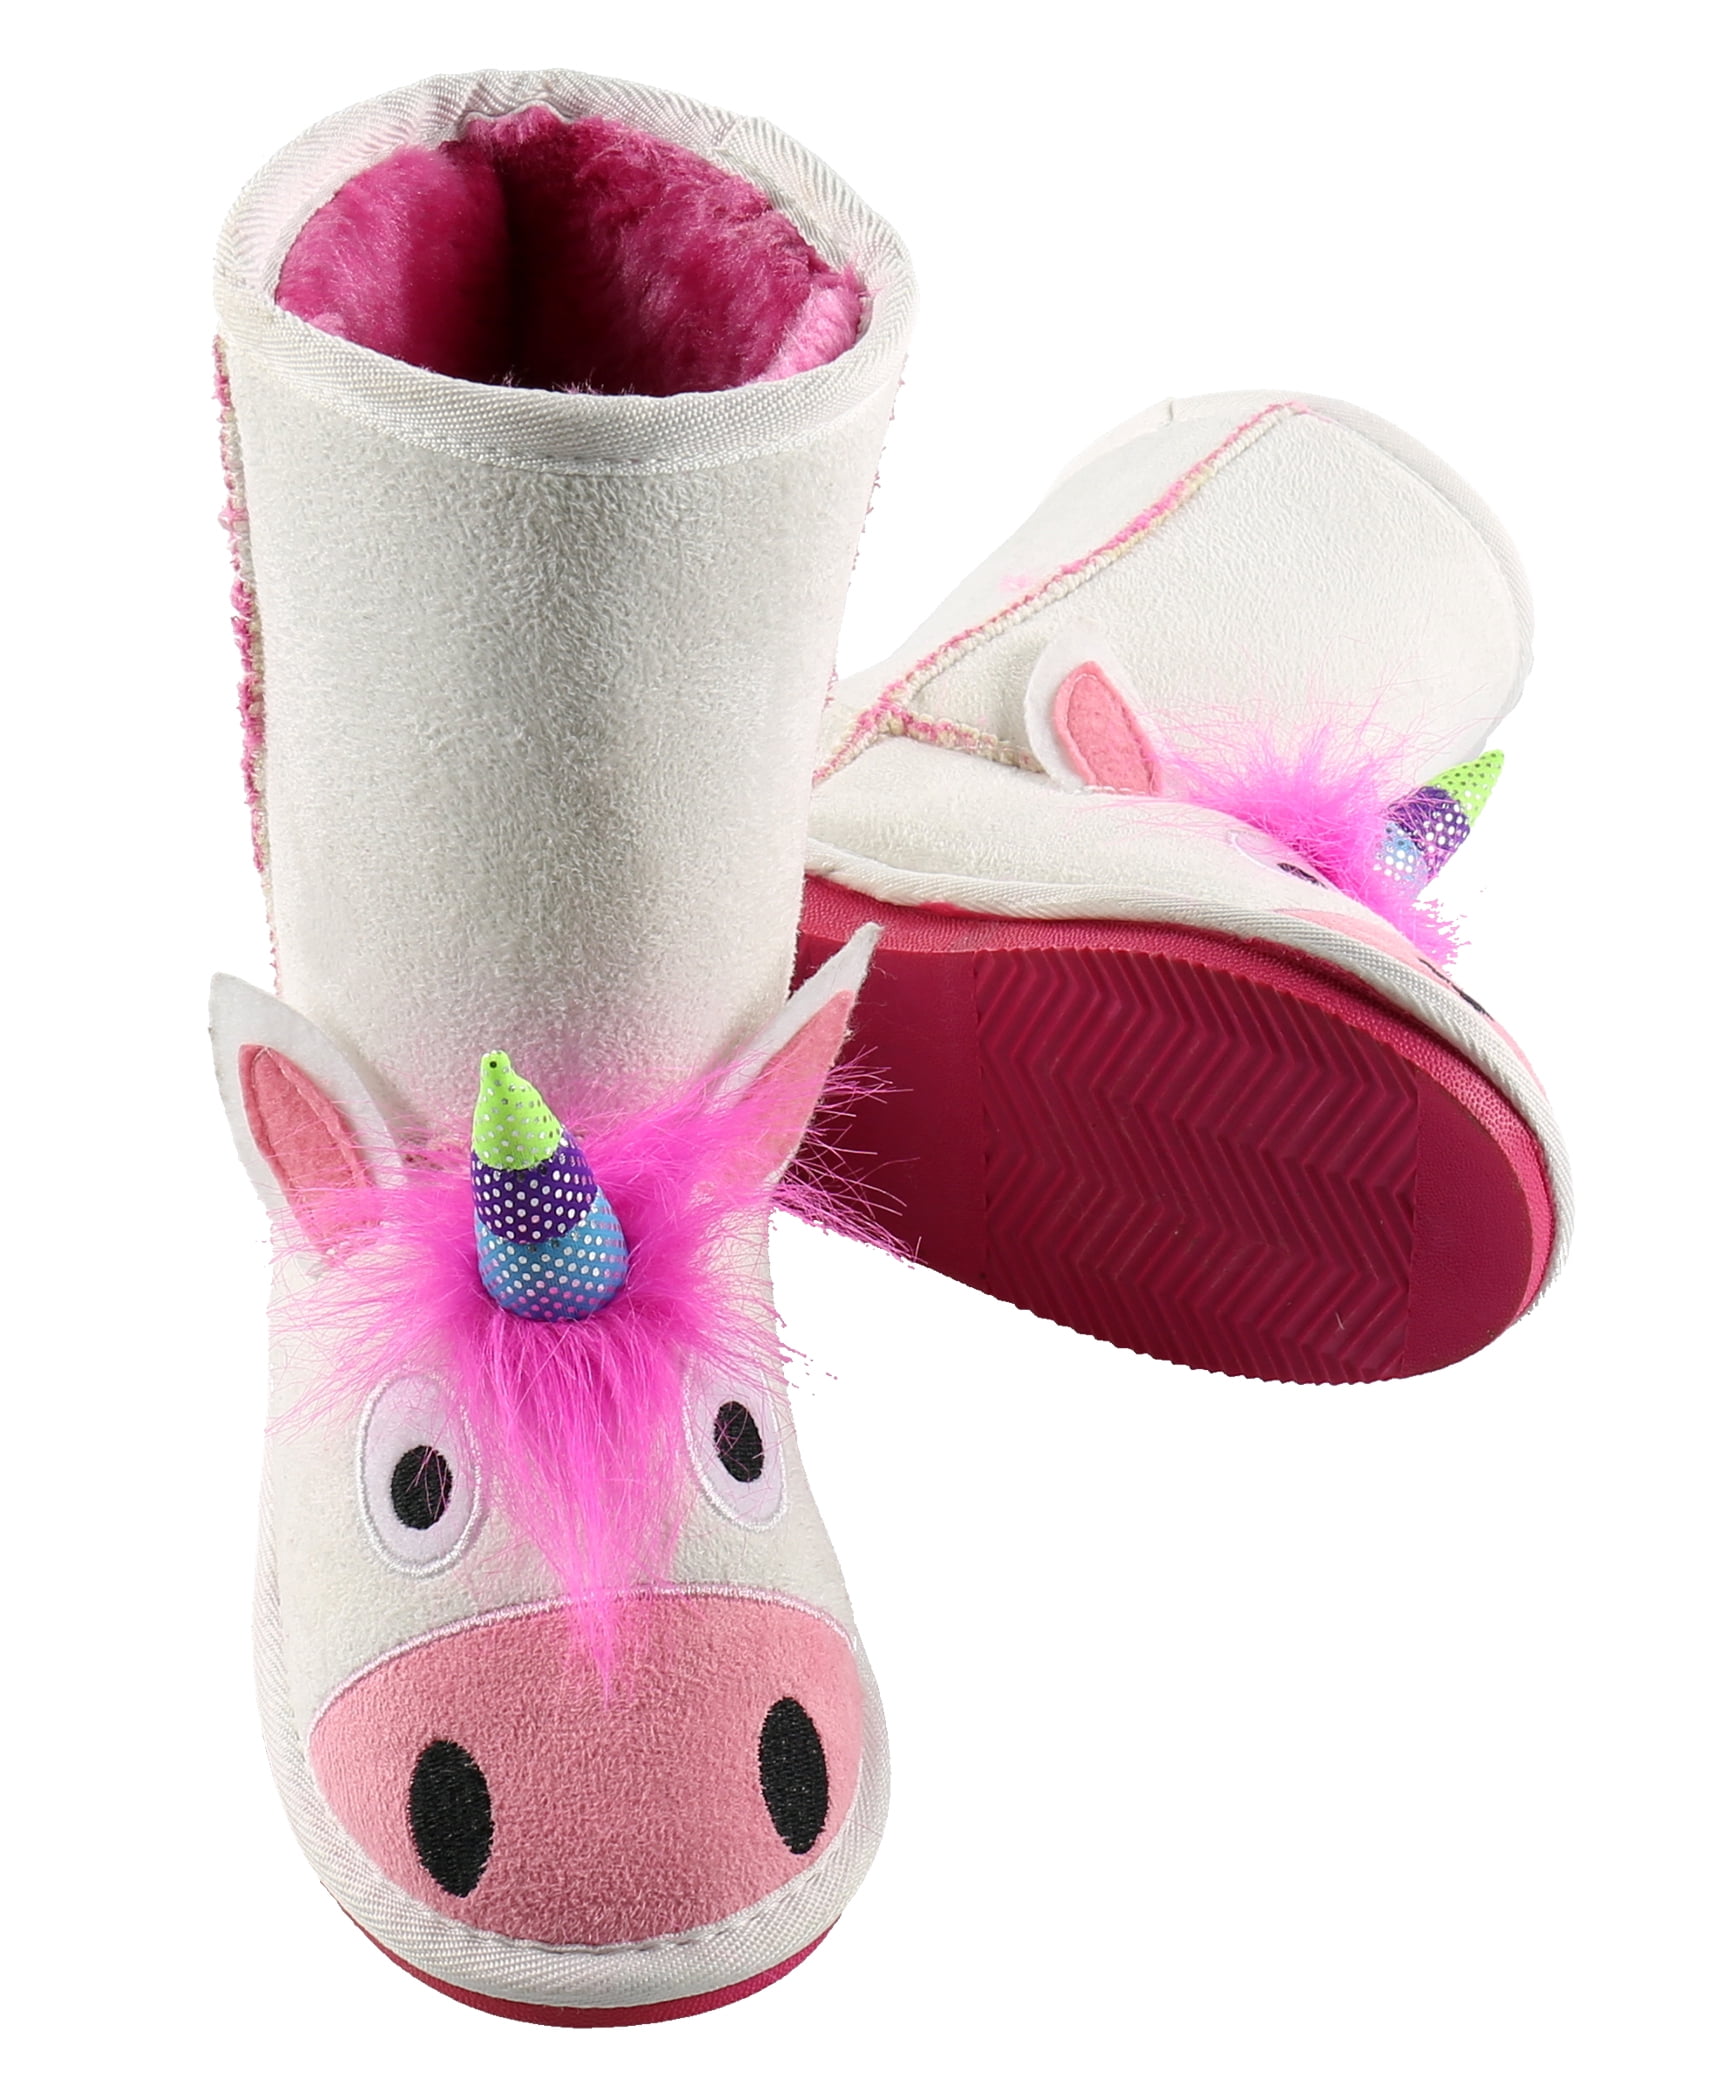 LazyOne Unisex Pink Cowboy Bootie Slippers